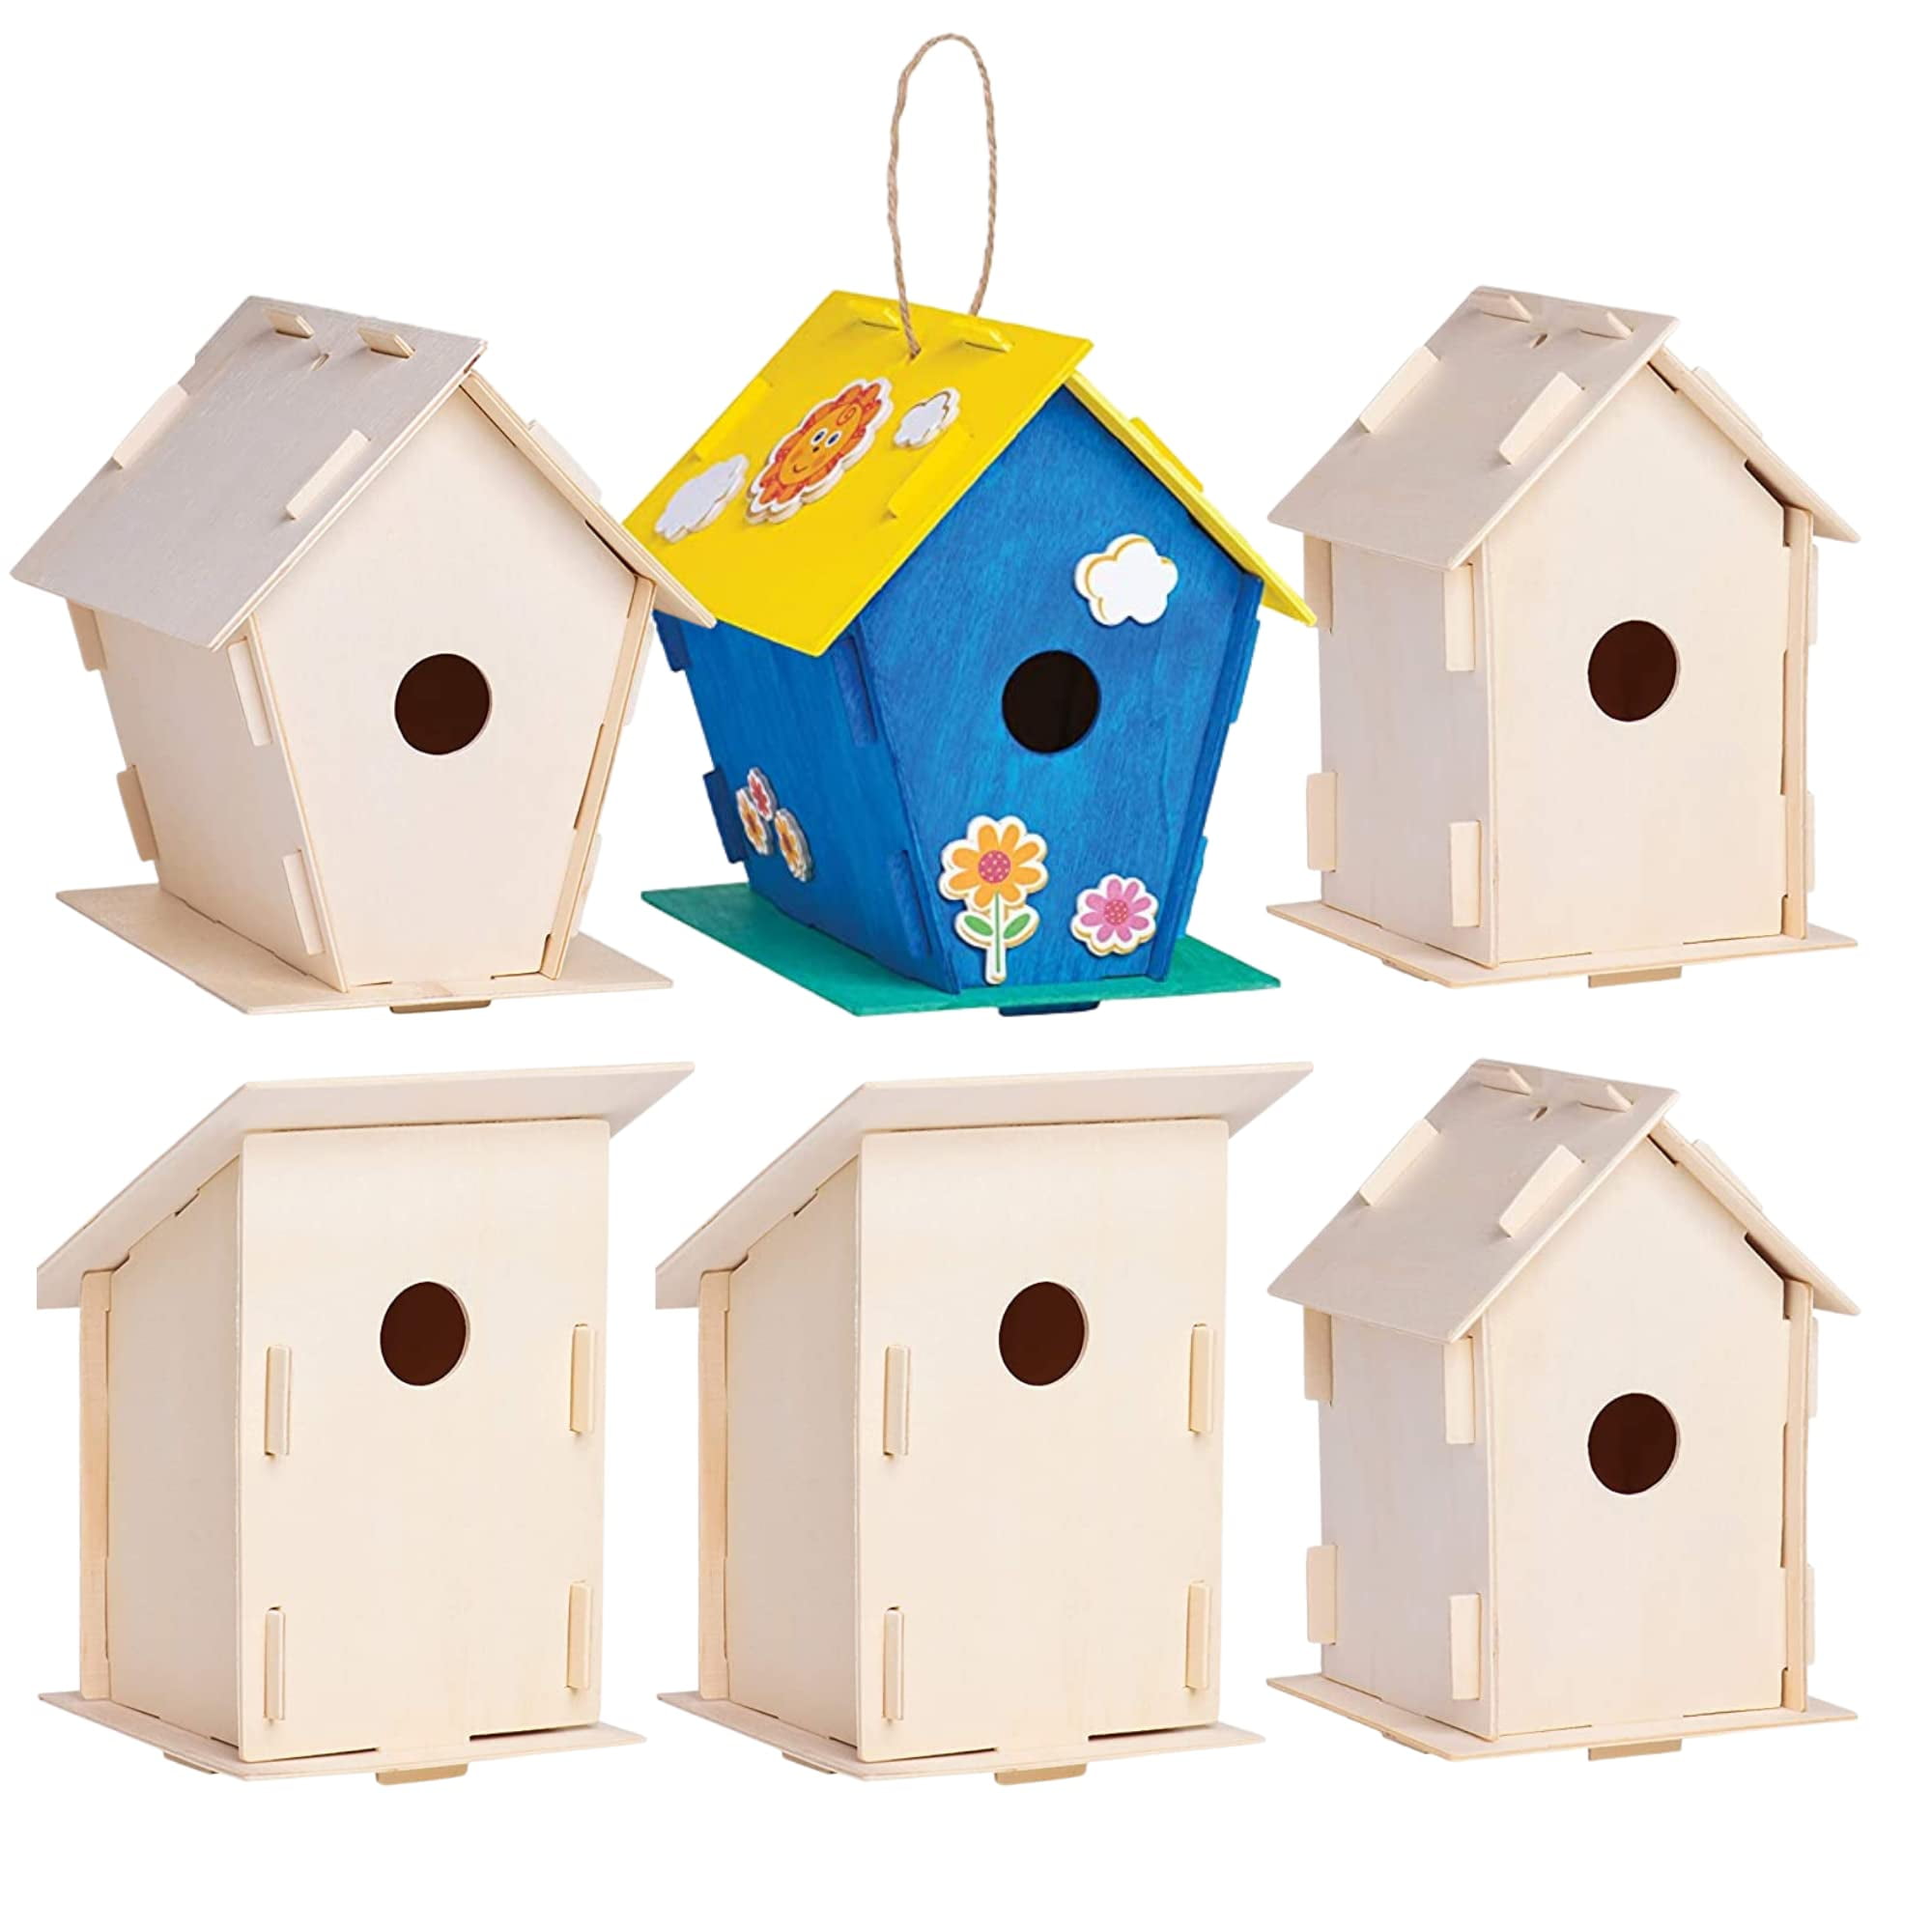 6 Wooden Birdhouse Kits - DIY Arts & Crafts Set for Kids - Includes Paint & Stickers